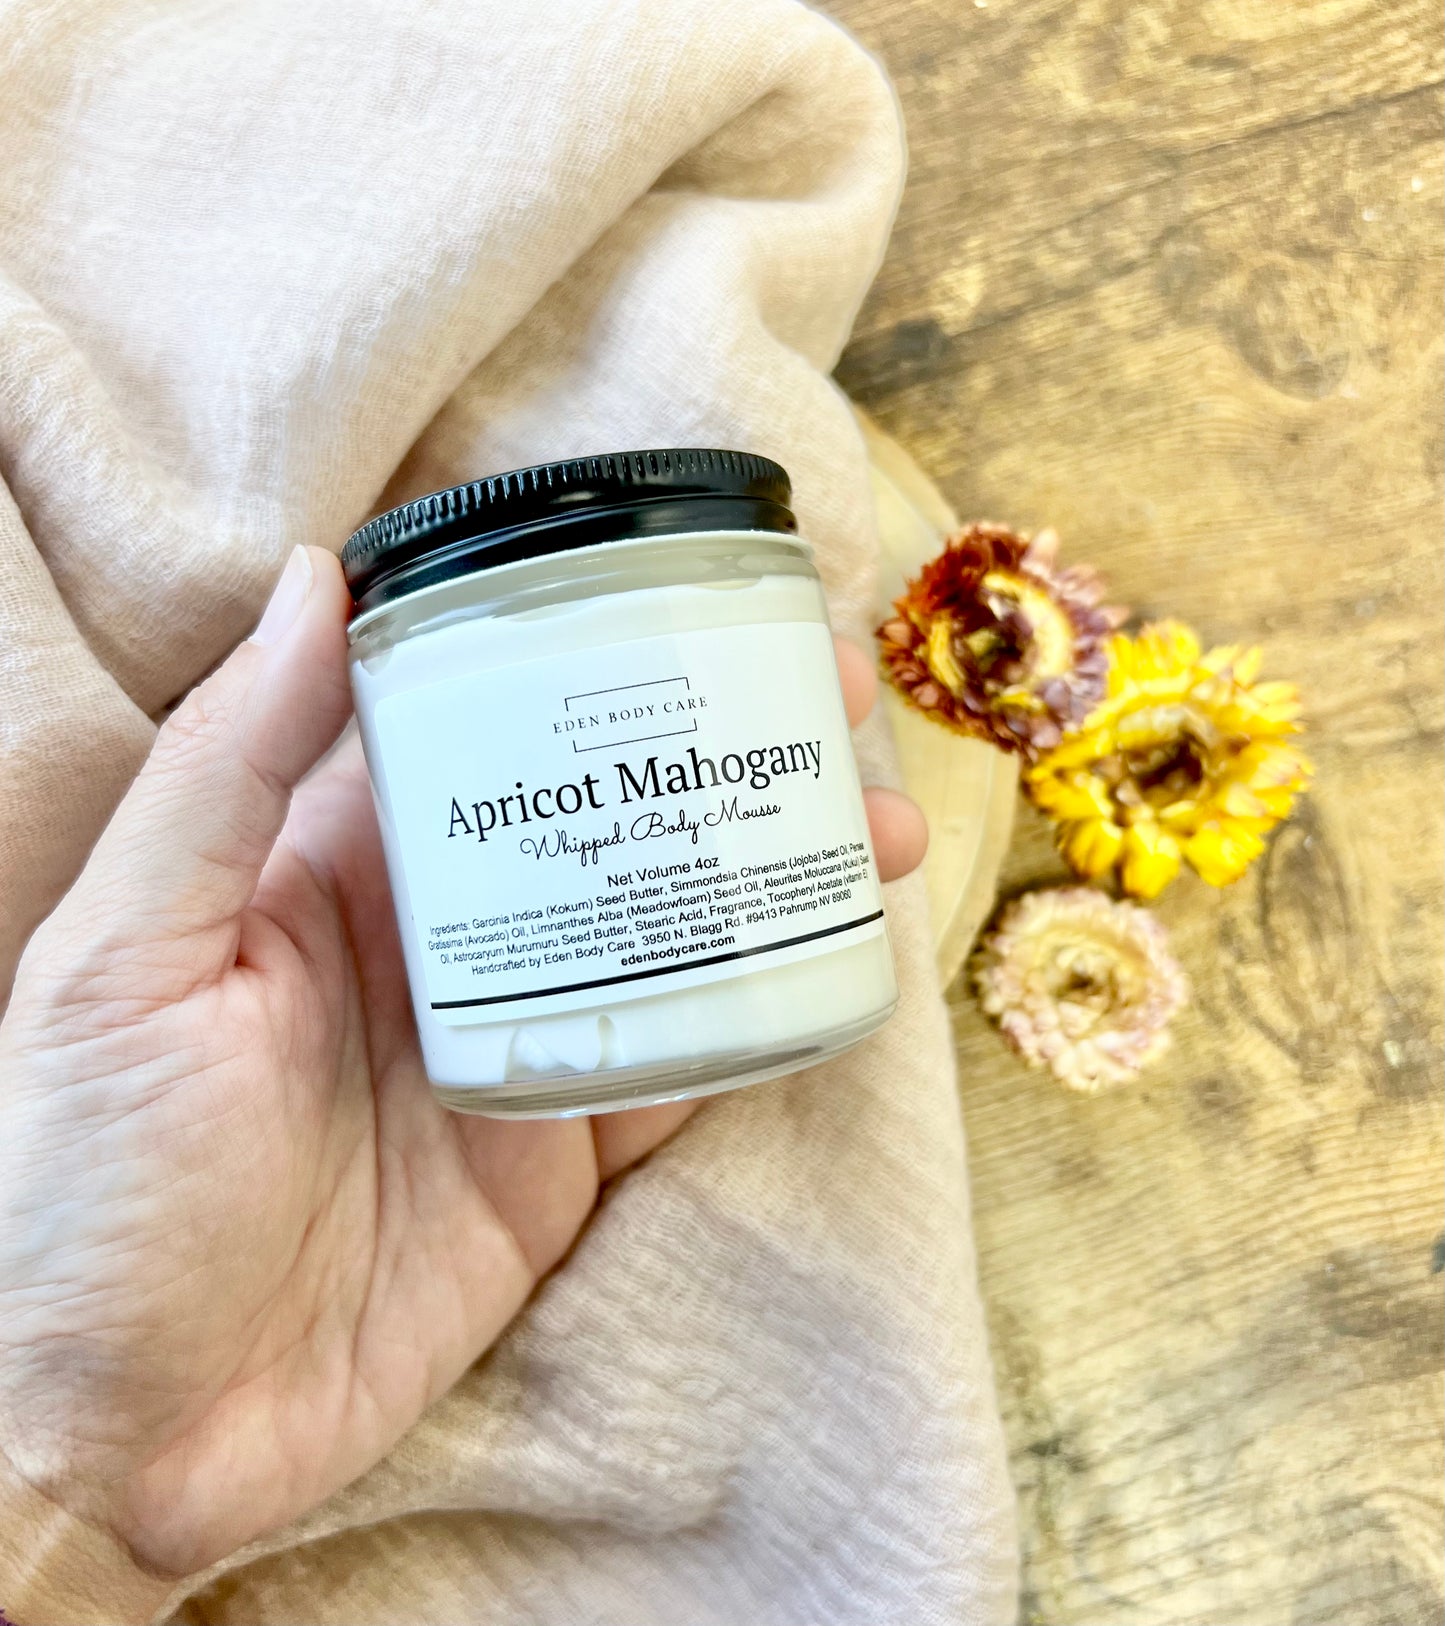 Apricot Mahogany Whipped Body Butter